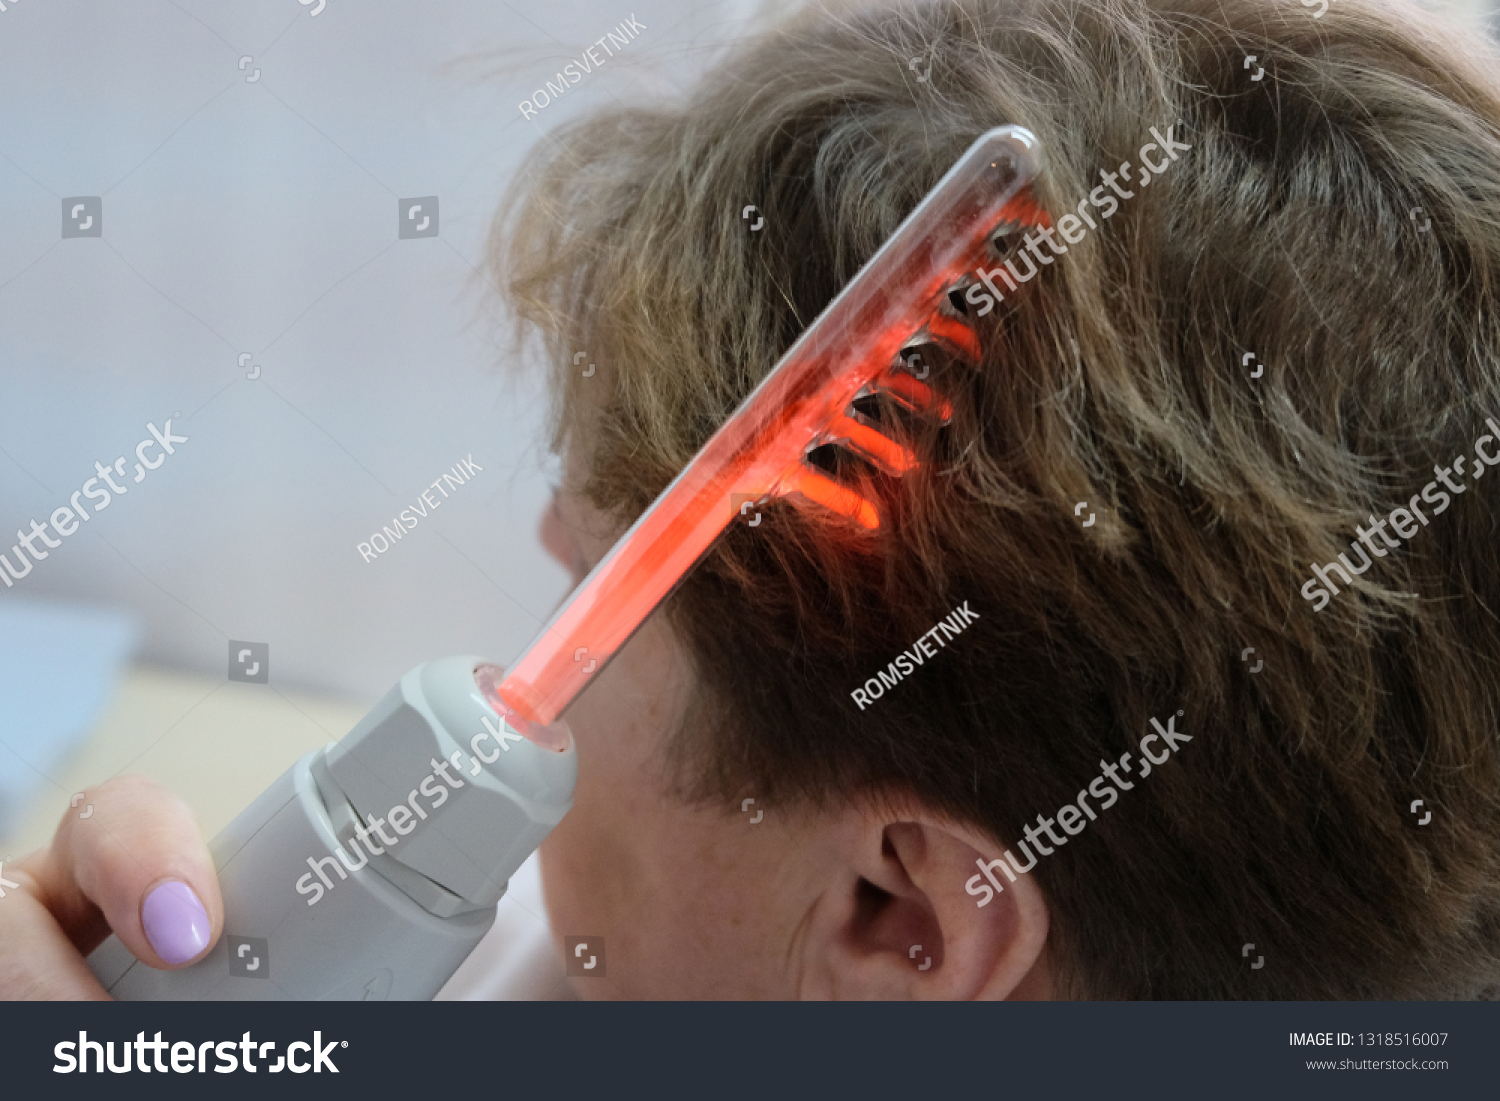 Woman combing hair with electric comb. d'Arsonval is a device for the physiotherapeutic effect on the tissues of the human body with a high-frequency, high-voltage and low-current impulse quick #1318516007